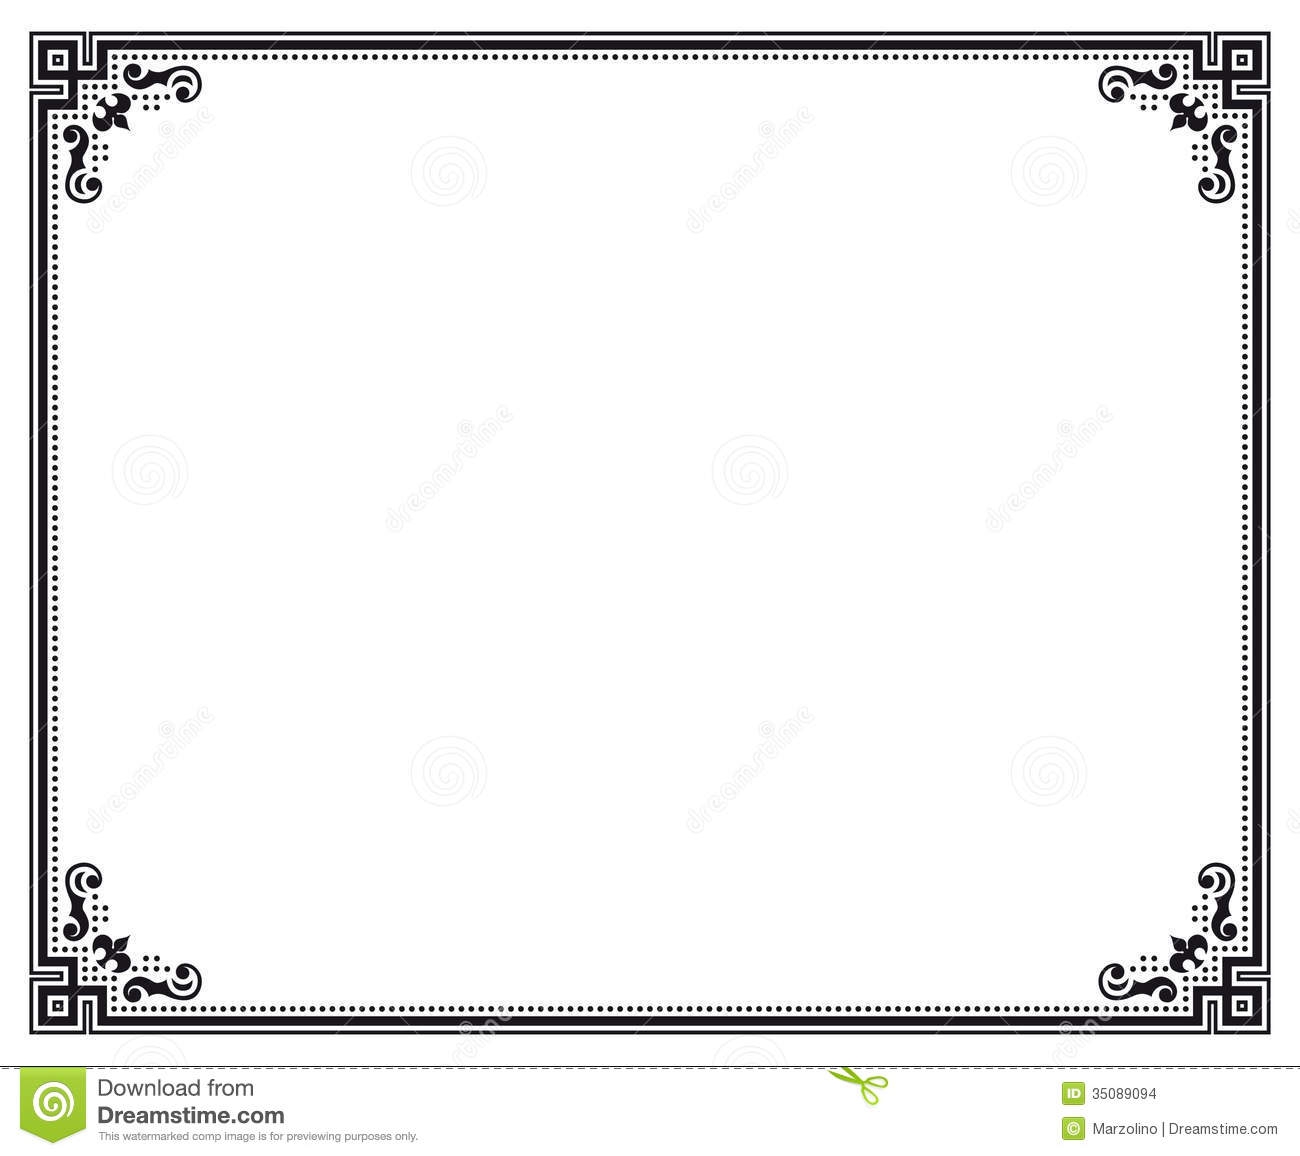 Royalty Free Certificate Border Clip Art, Vector Images 